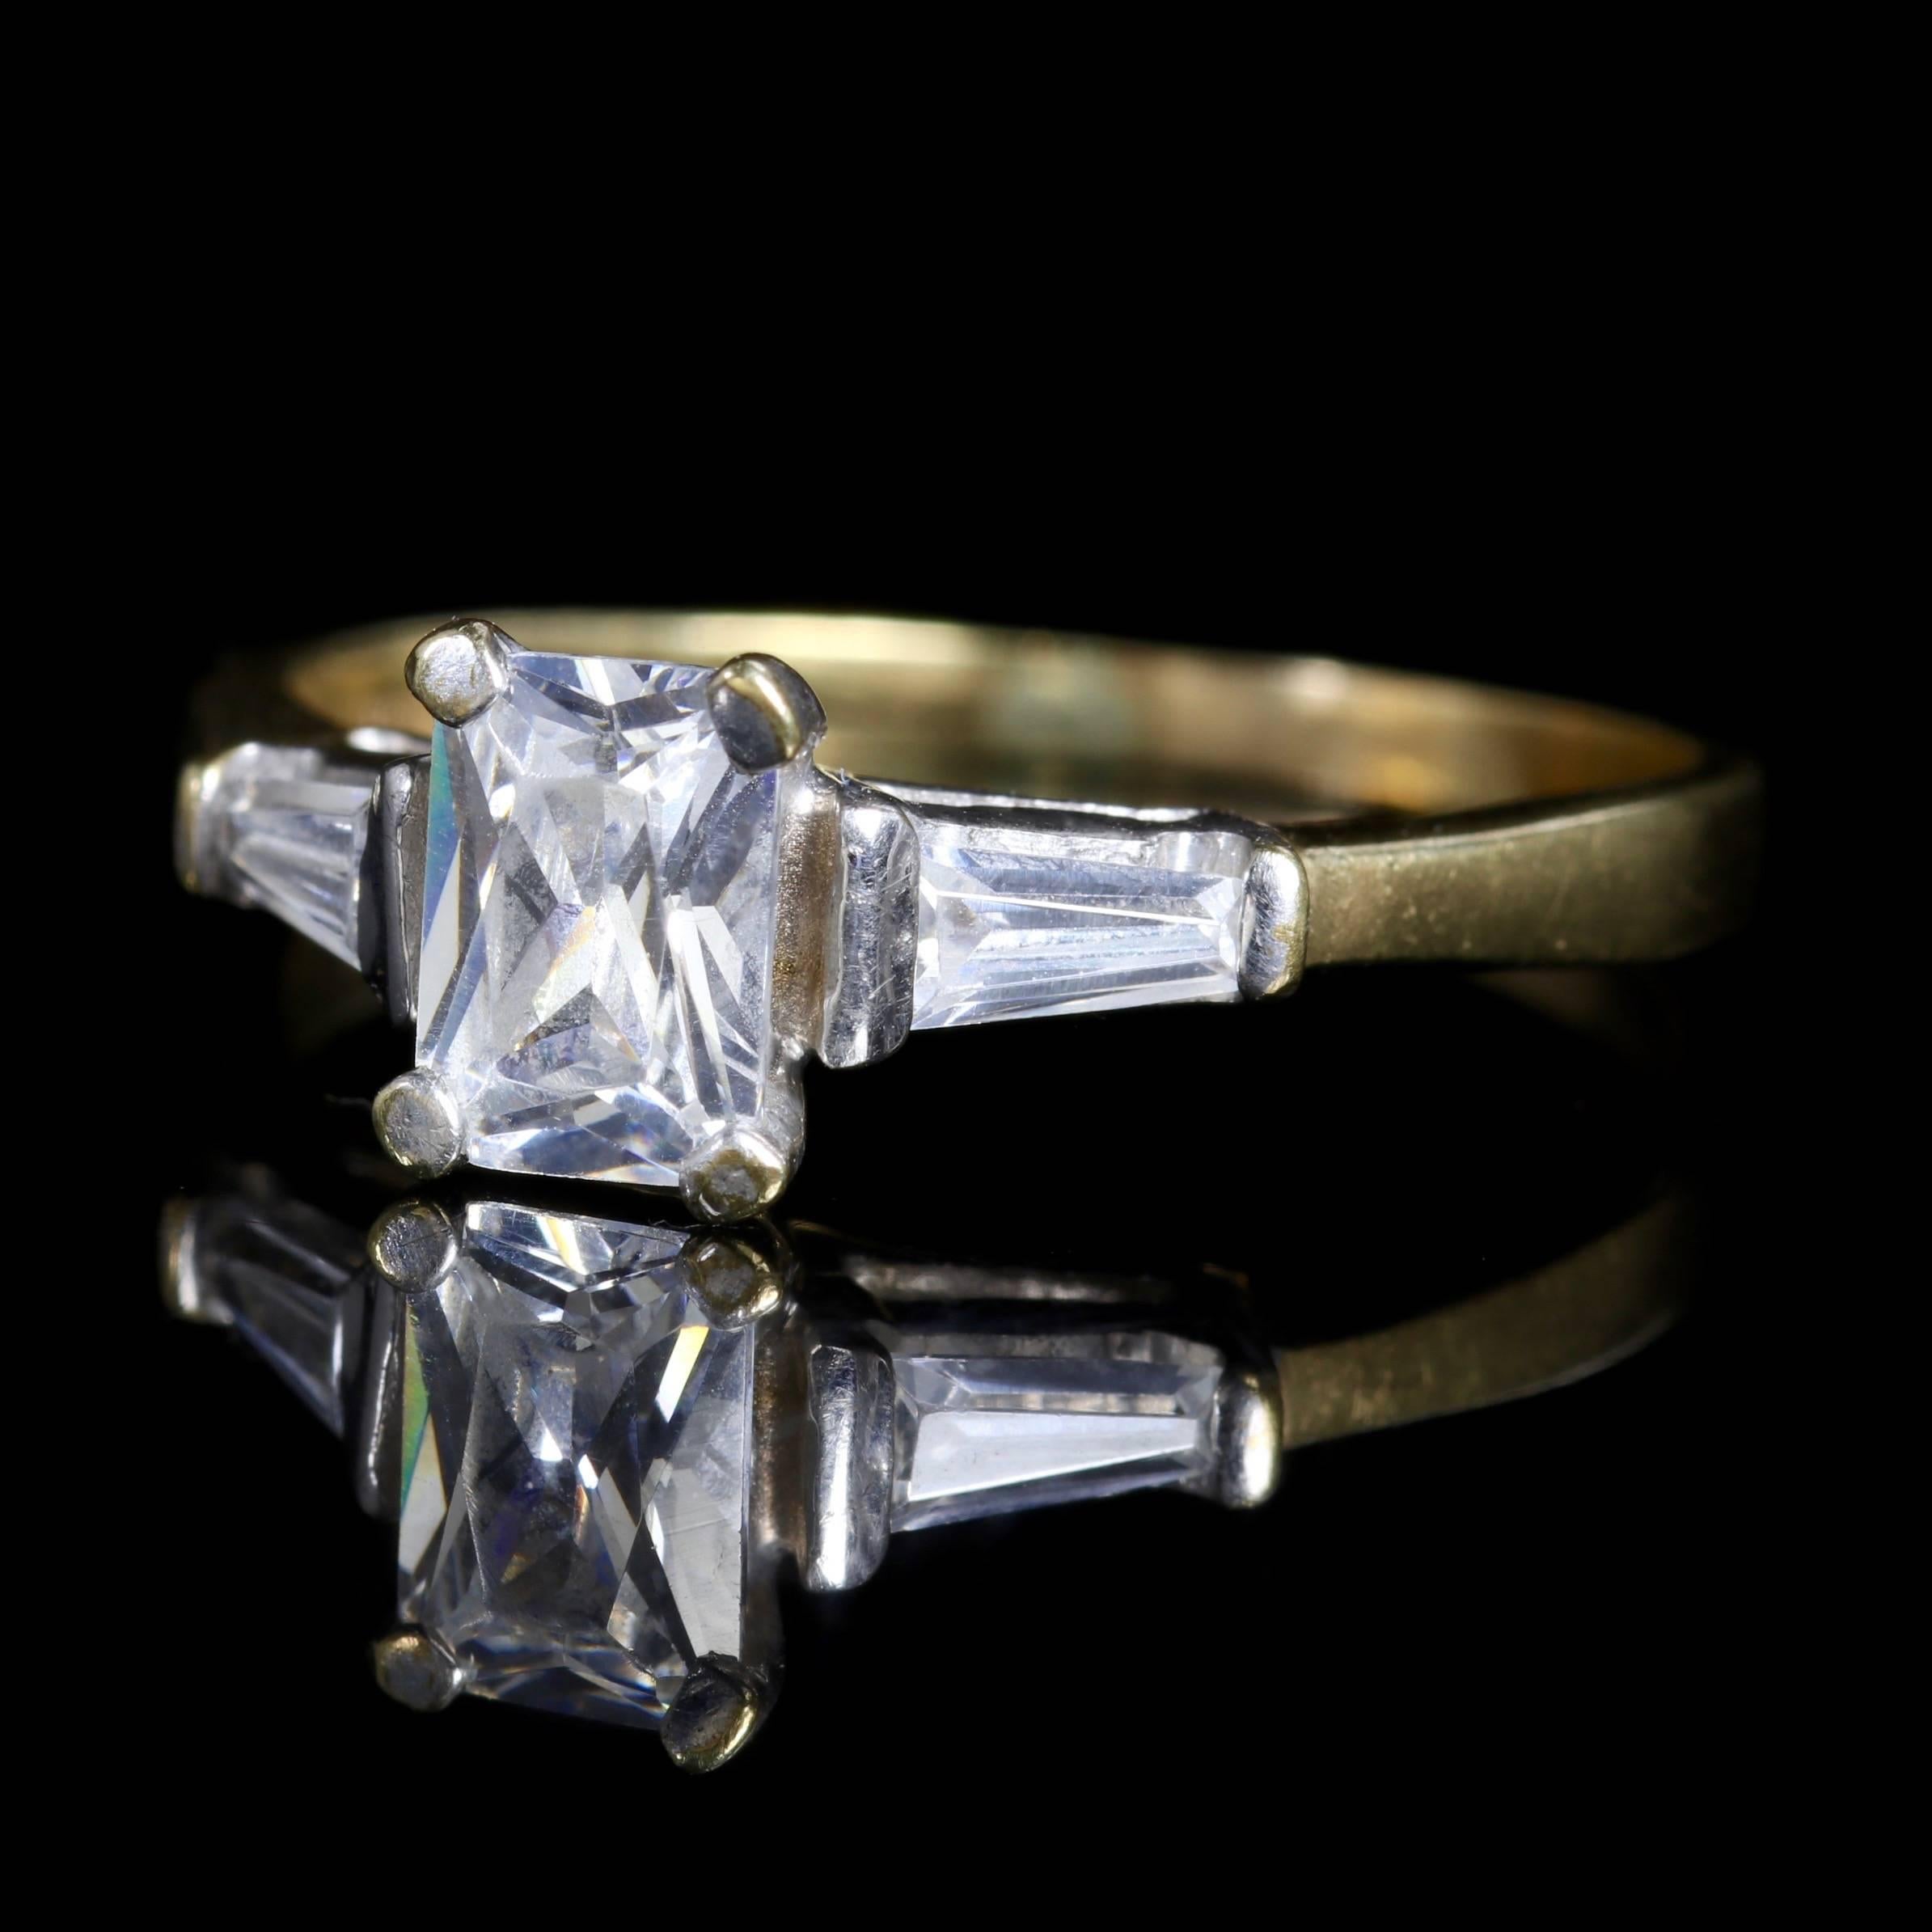 This Art Deco 9ct Yellow Gold and 9ct White Gold ring boasts a superb emerald cut Paste Stone.

The central stone is approx. 1.35ct baguette cut Paste Stones that chase down each shoulder.

Paste is hand-cut glass that has been polished with metal